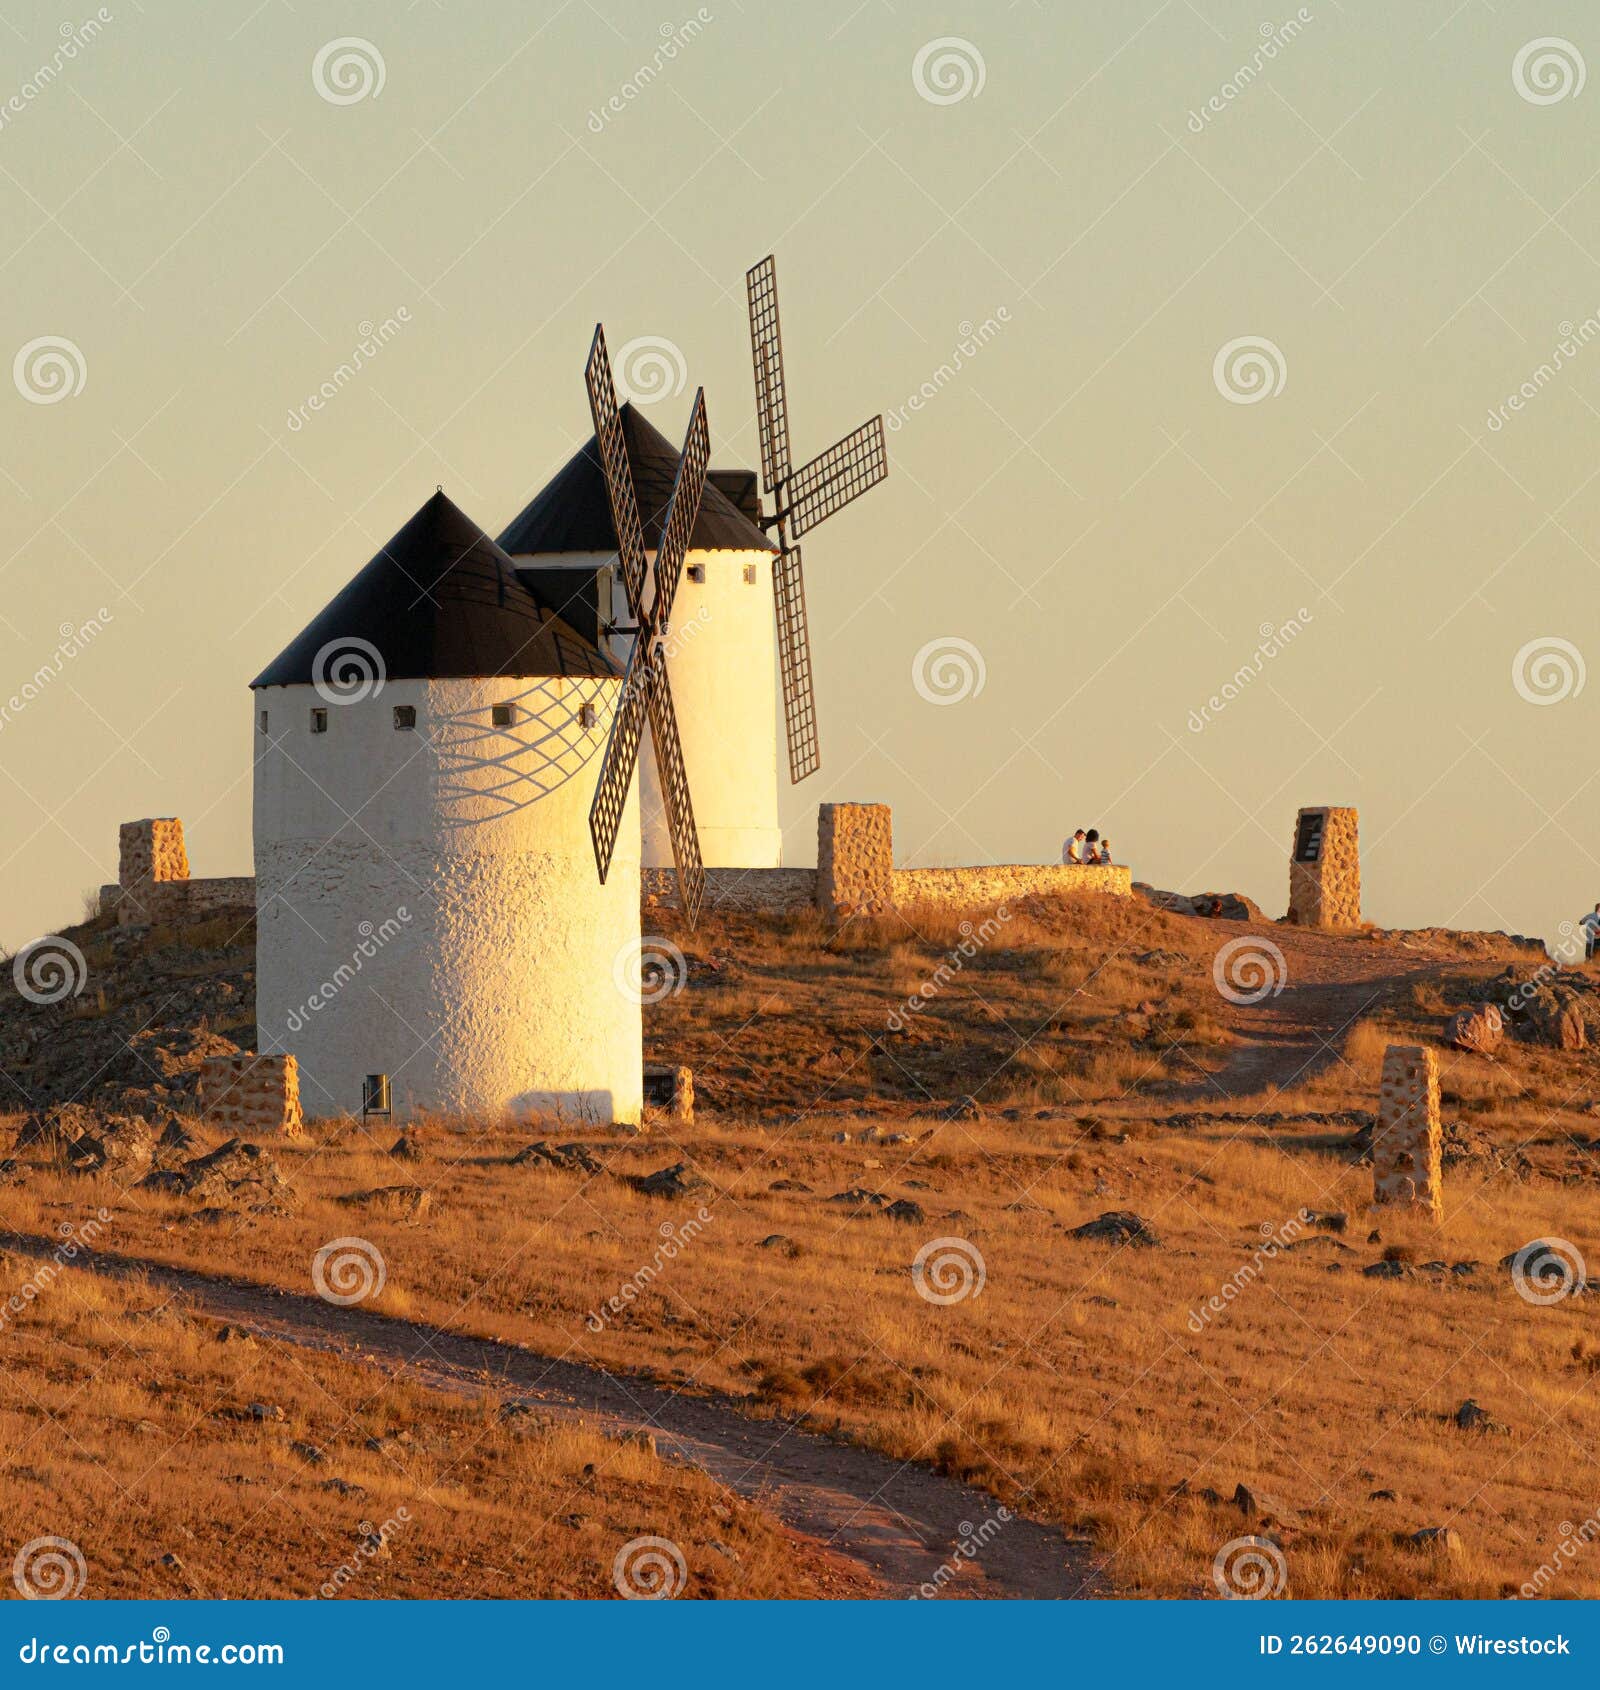 beautiful view of windmills on a hill in herencia, ciudad real, spain